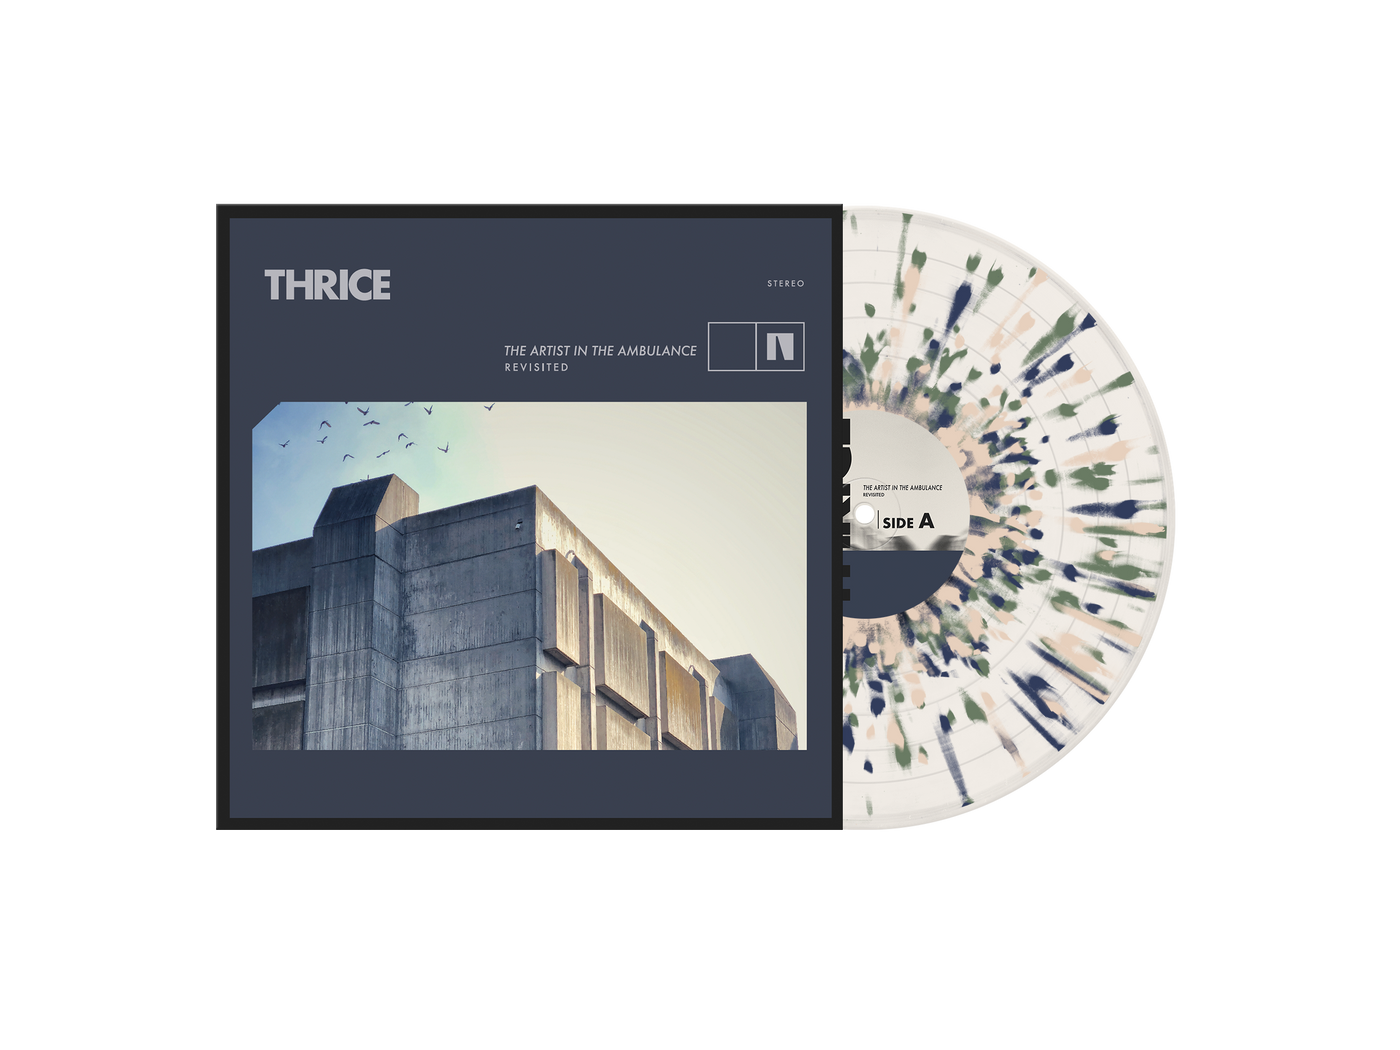 TAITA 20th Anniversary Revisited - 12" Vinyl (Cloudy Clear with Cream, Green, Blue Splatter)